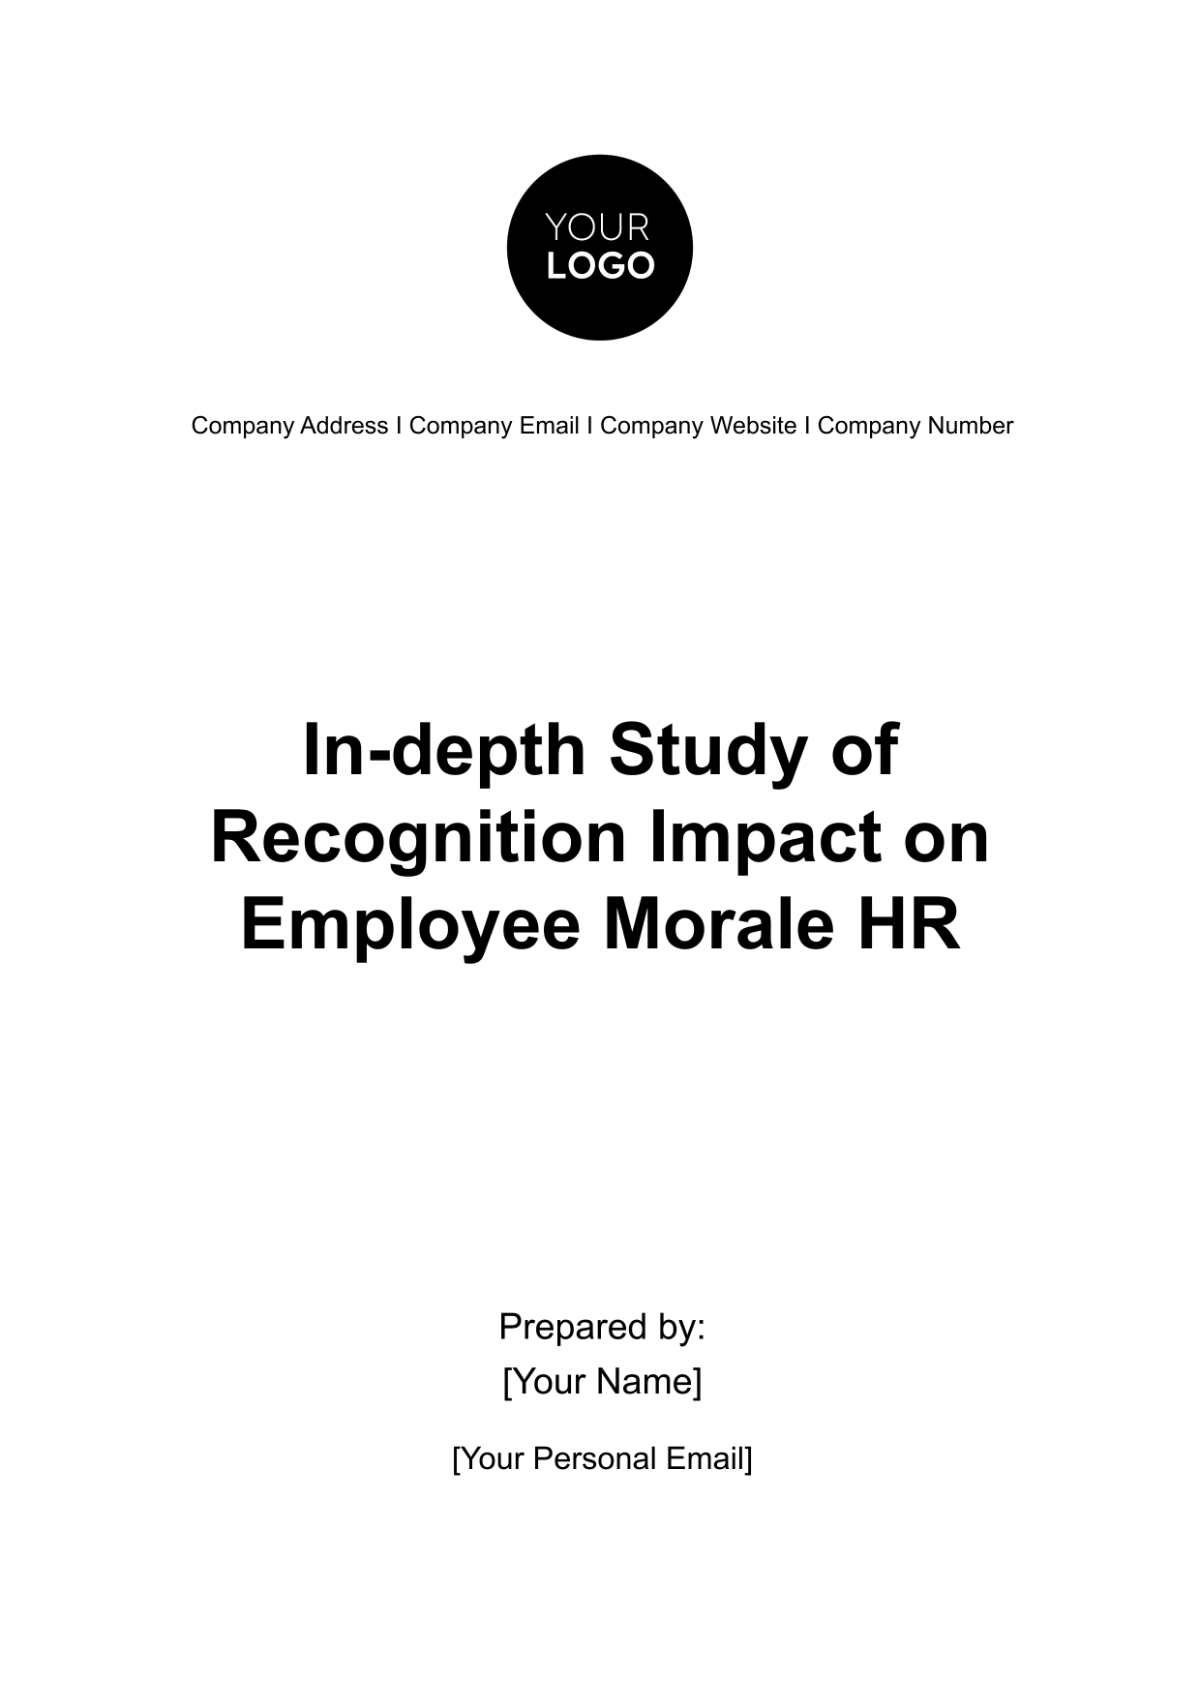 In-depth Study of Recognition Impact on Employee Morale HR Template